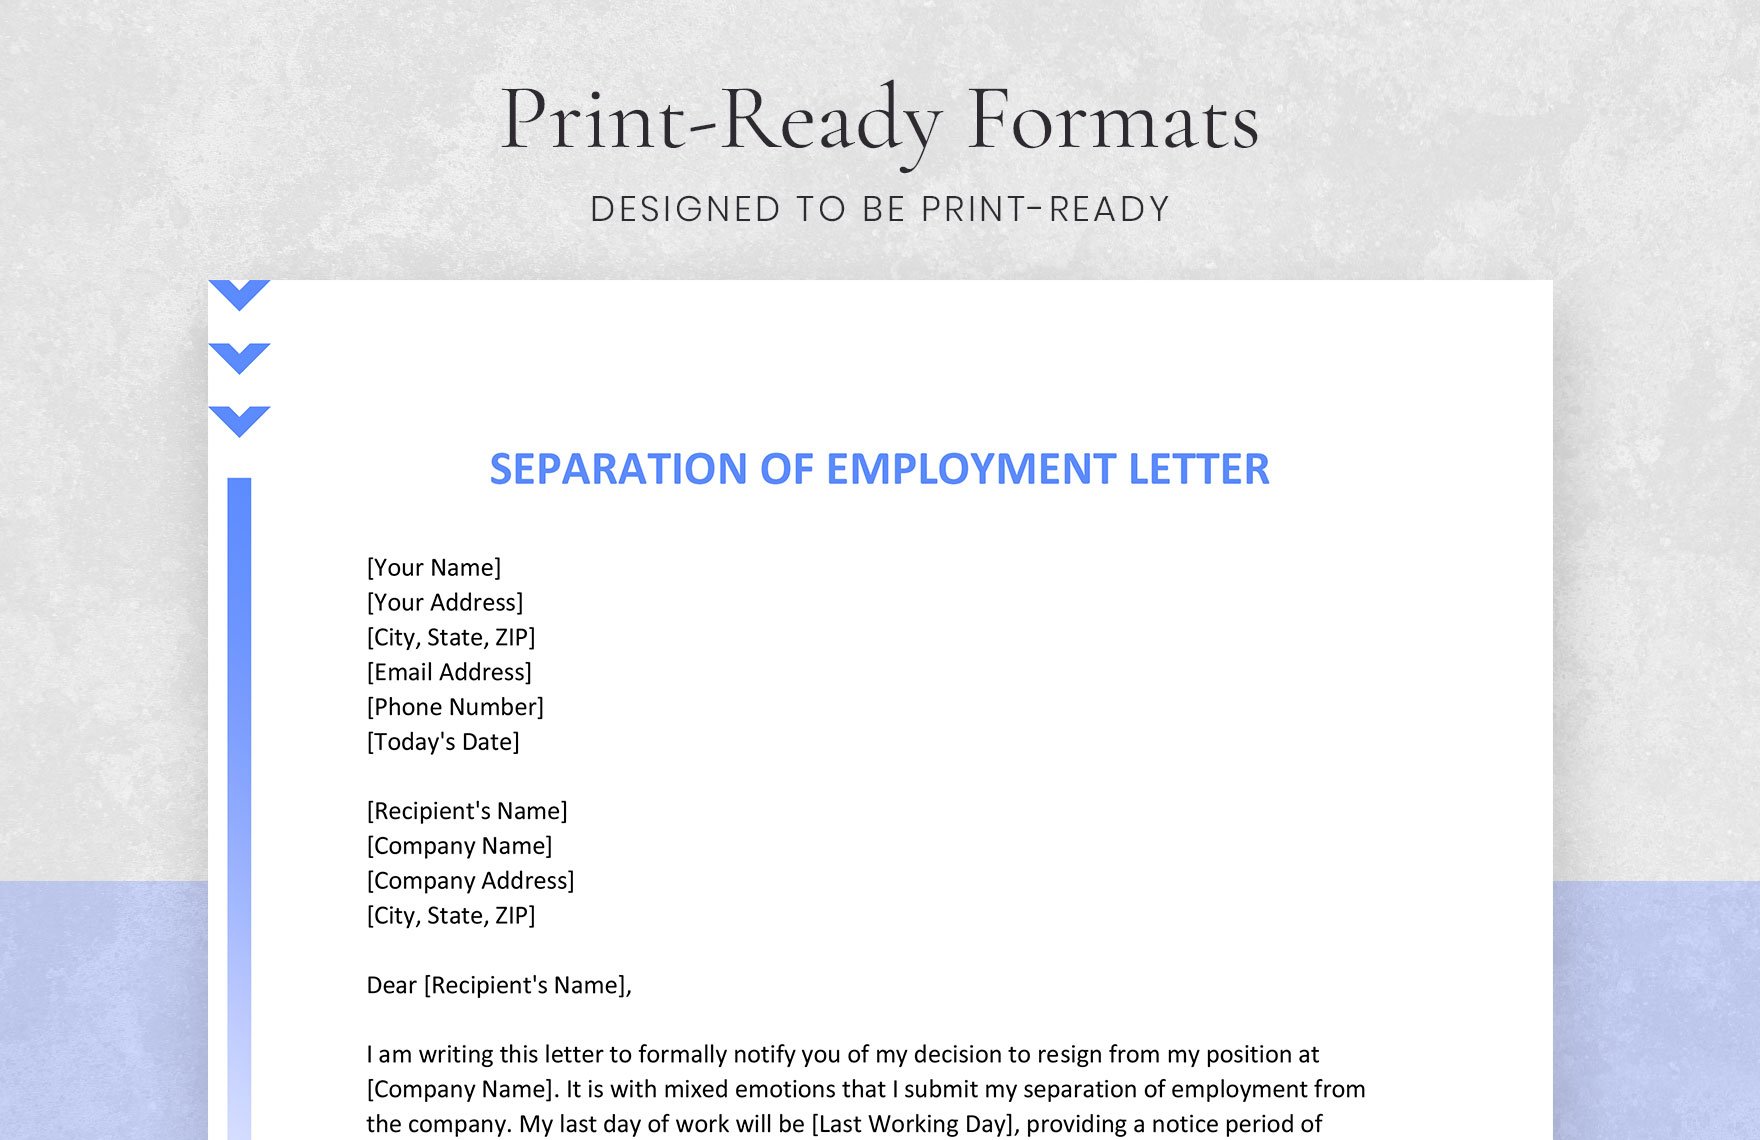 Separation of Employment Letter